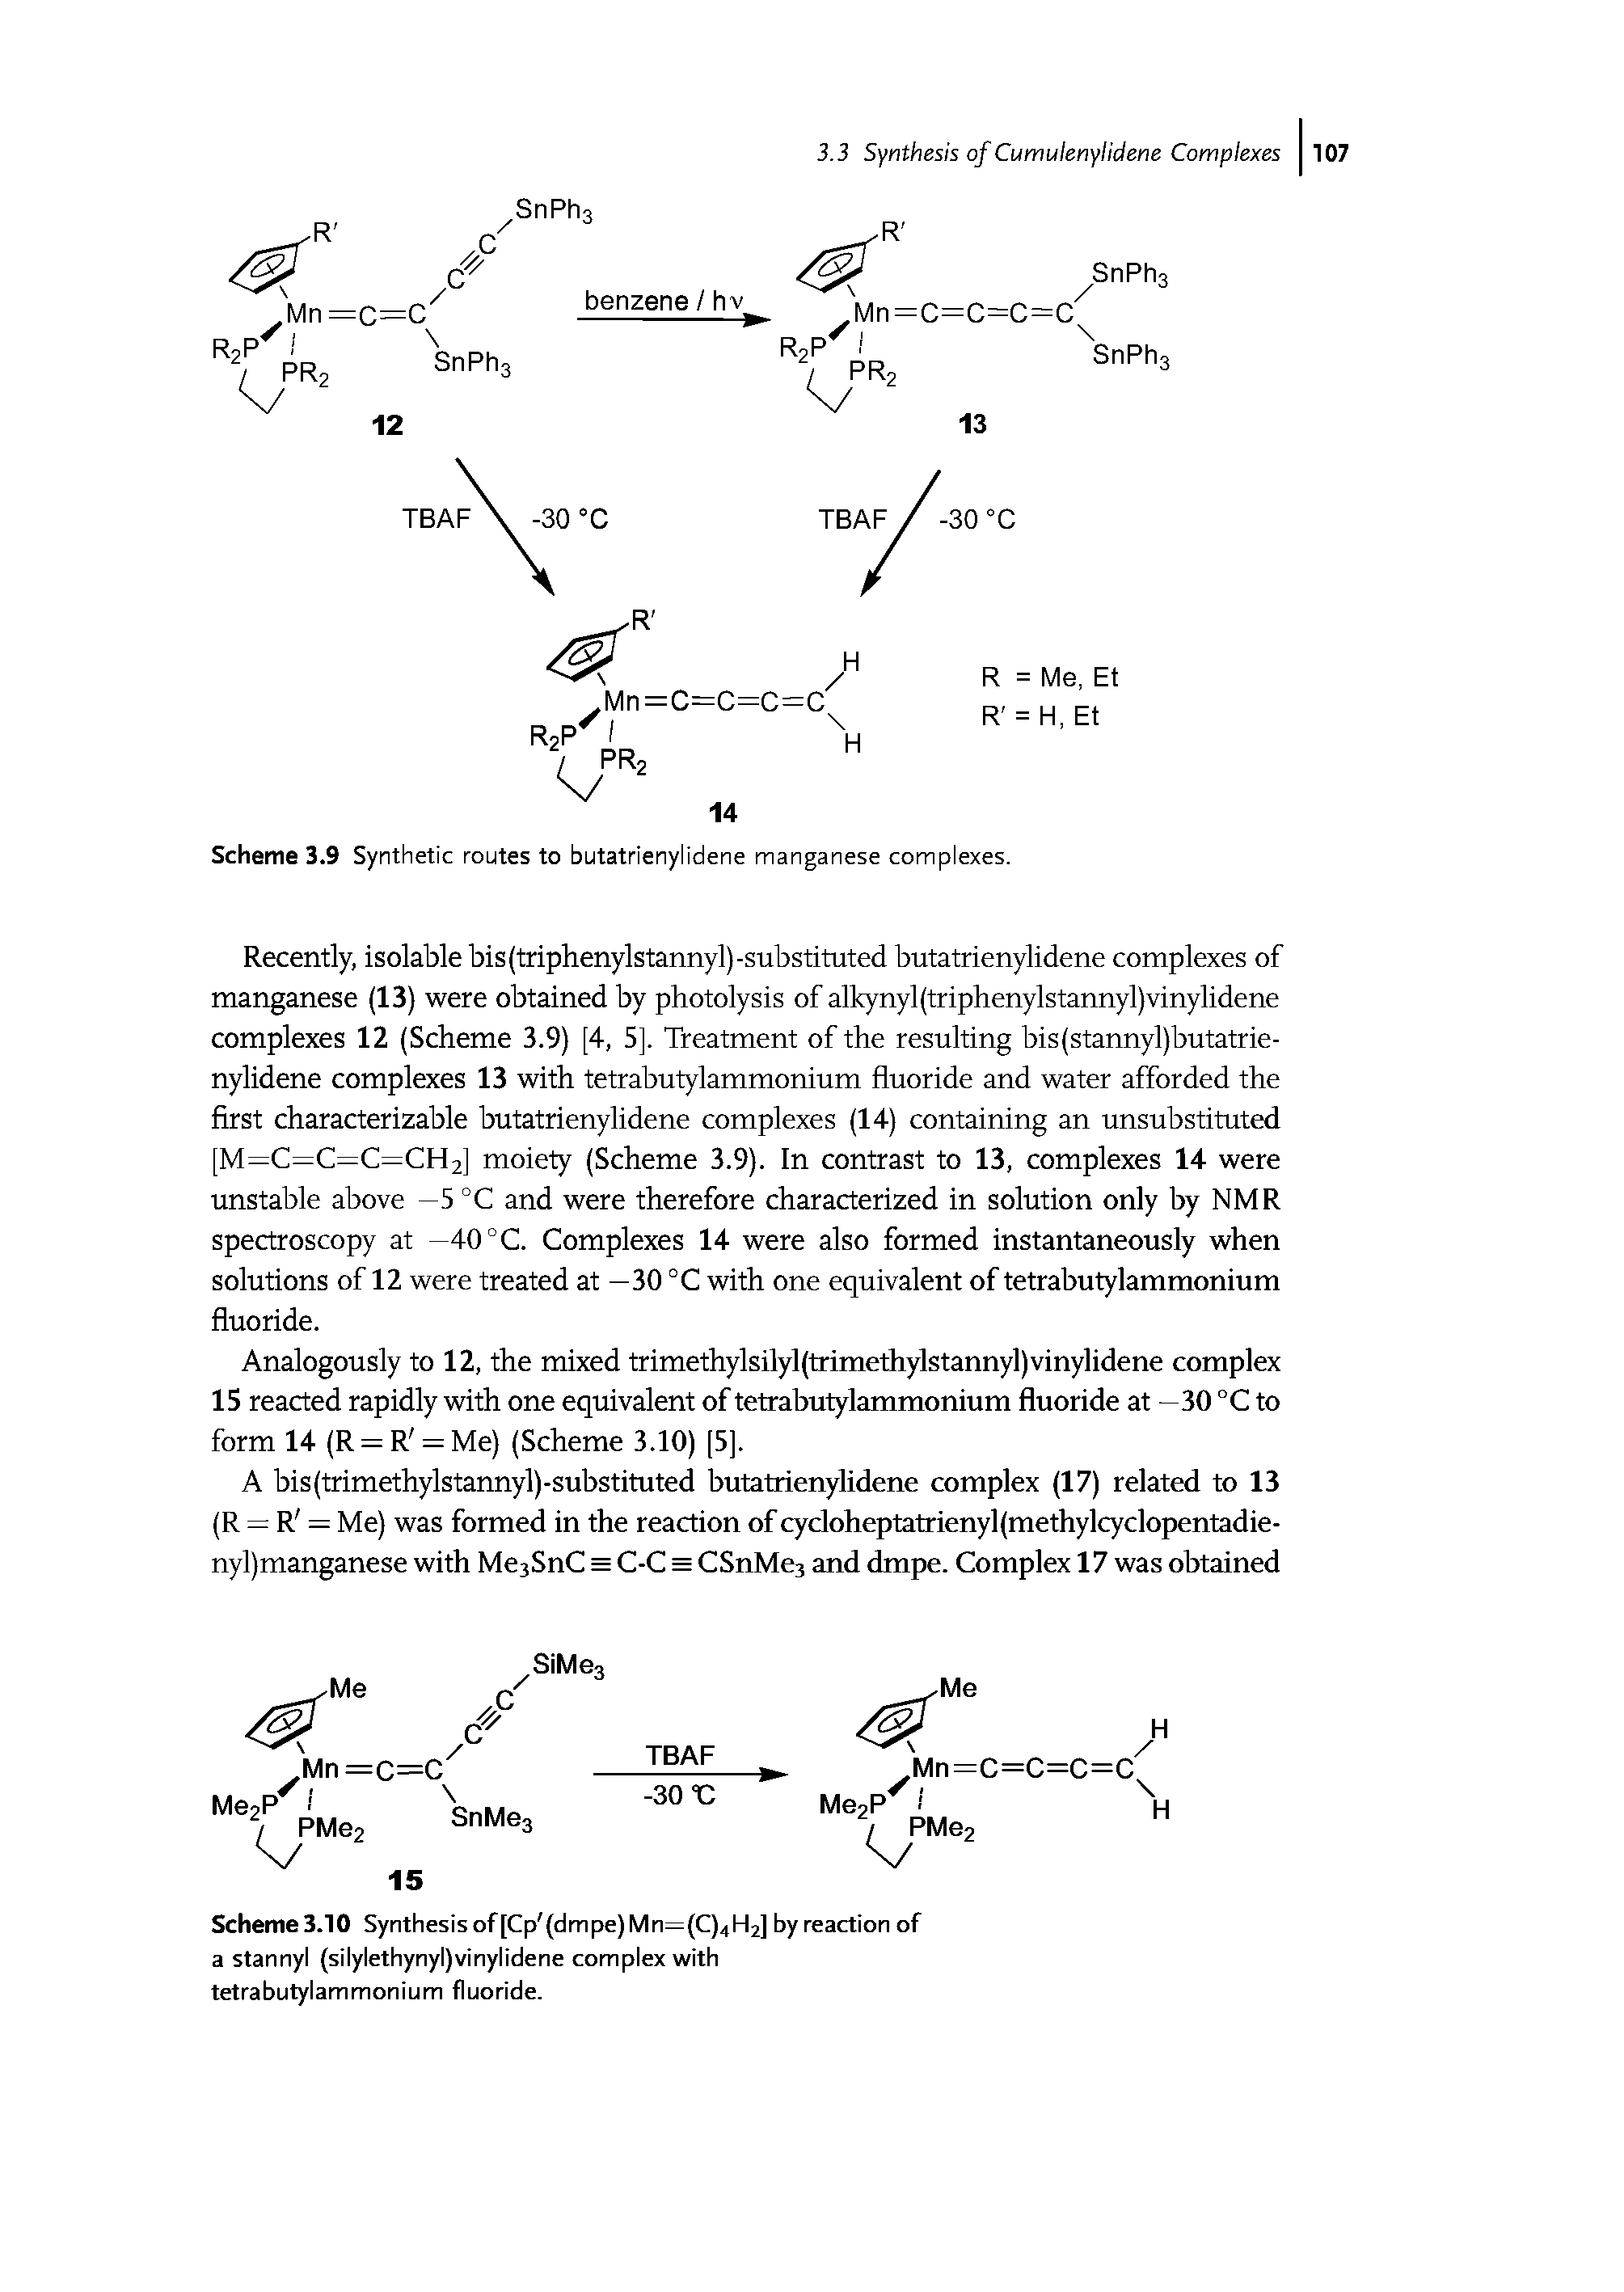 Scheme 3.9 Synthetic routes to butatrienylidene manganese complexes.